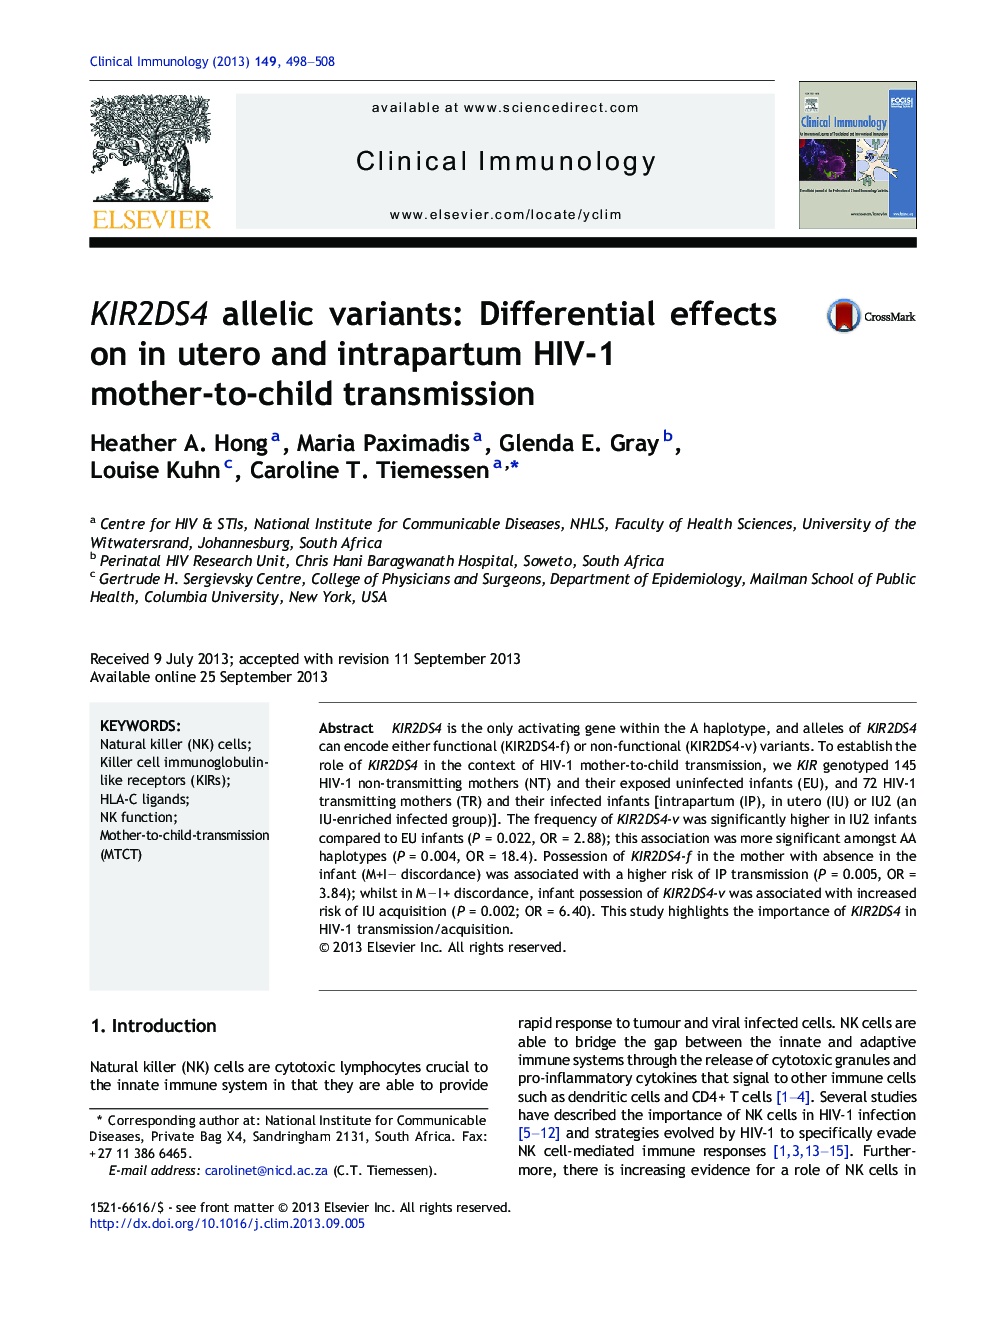 KIR2DS4 allelic variants: Differential effects on in utero and intrapartum HIV-1 mother-to-child transmission